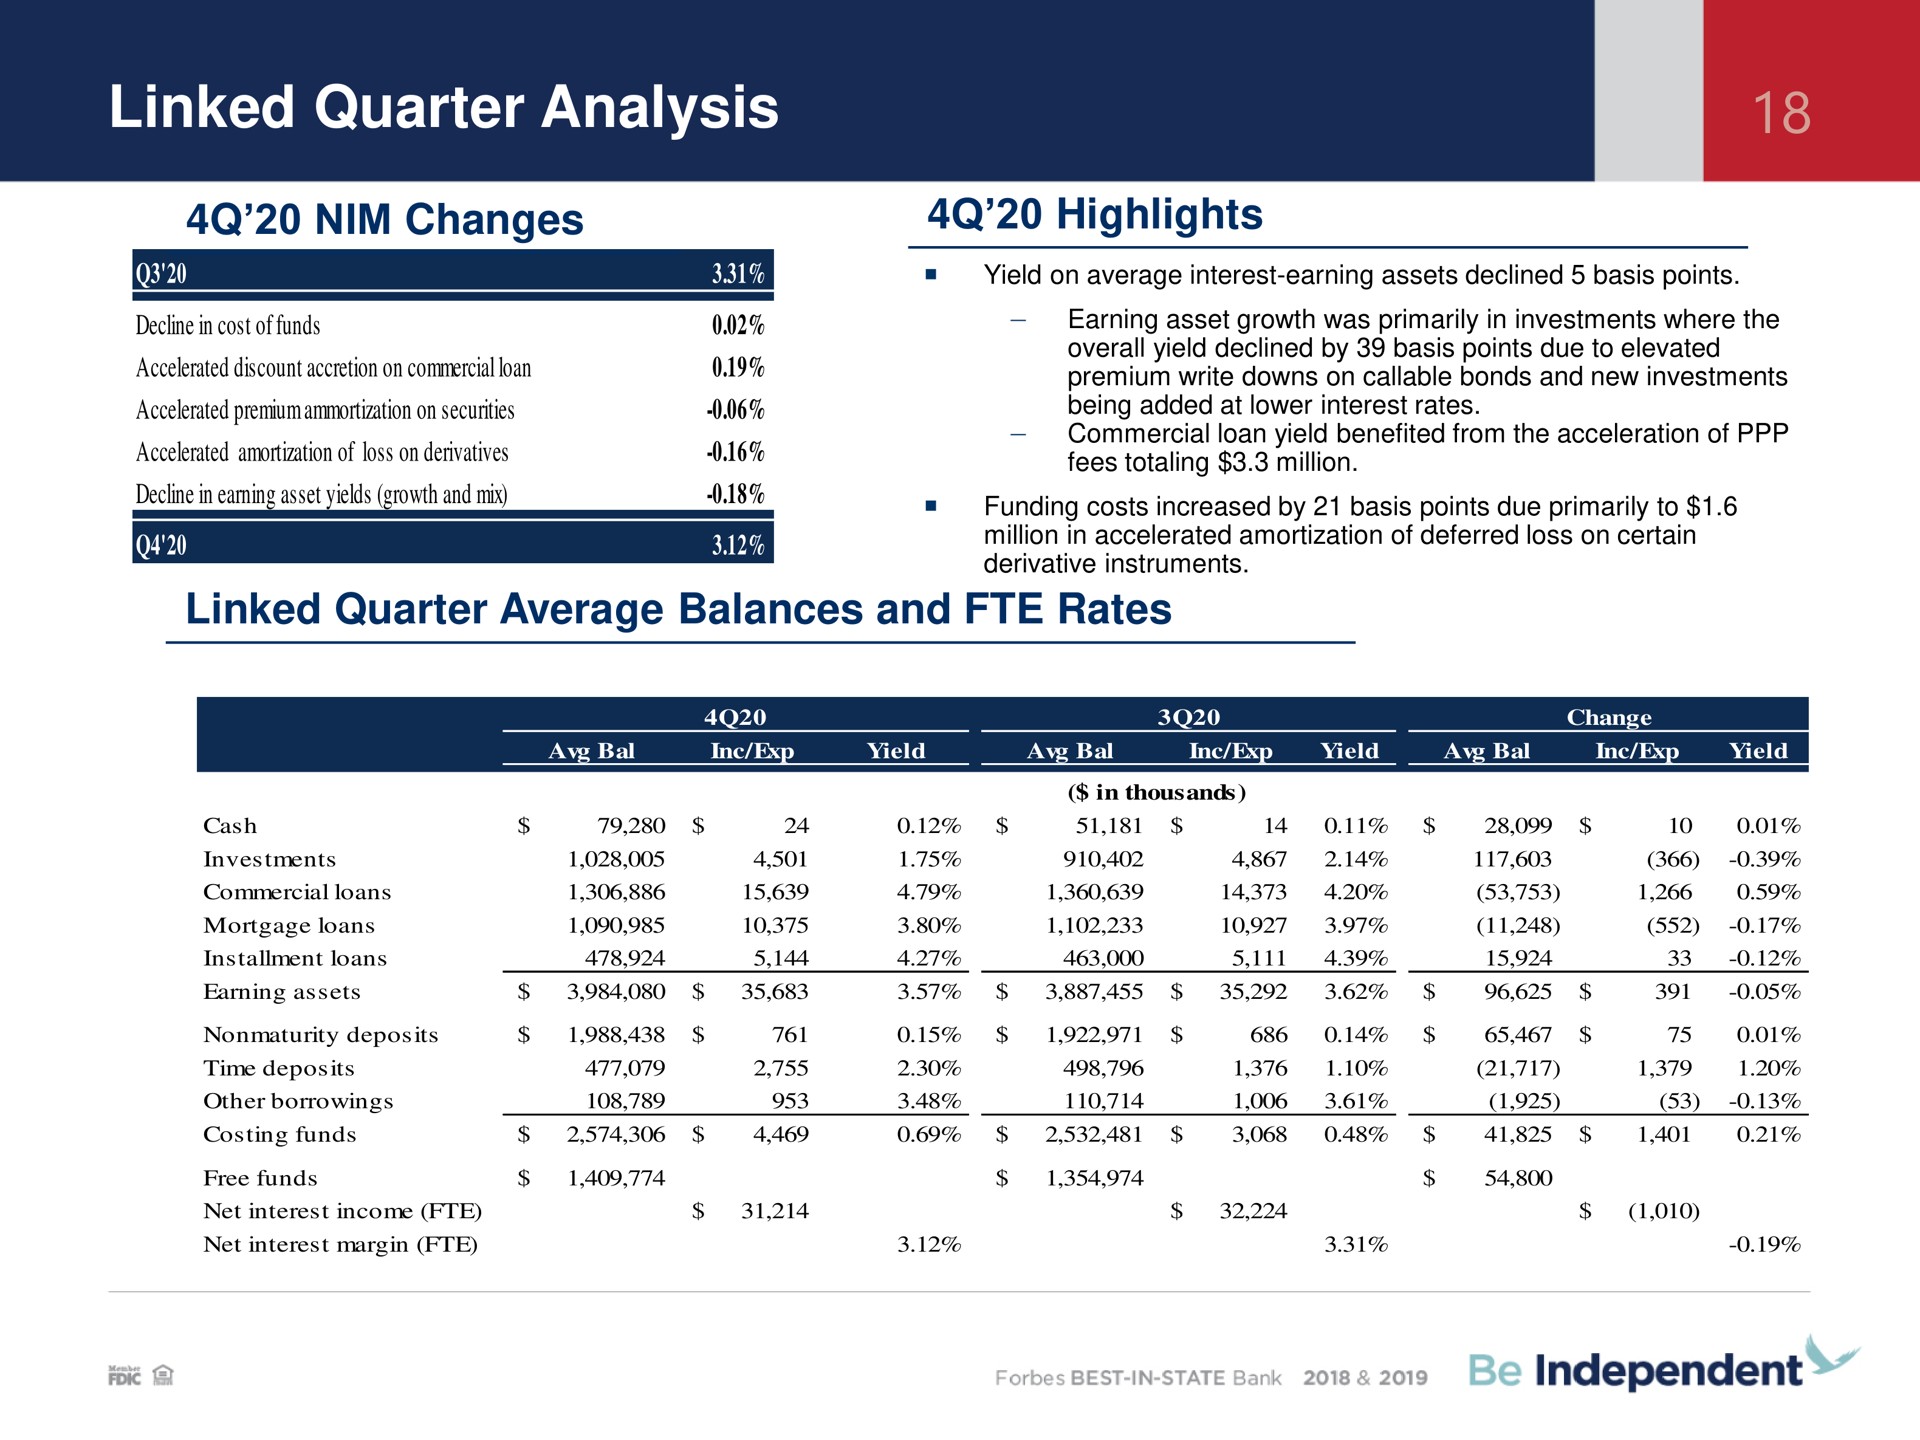 linked quarter analysis nim changes highlights average balances and rates | Independent Bank Corp